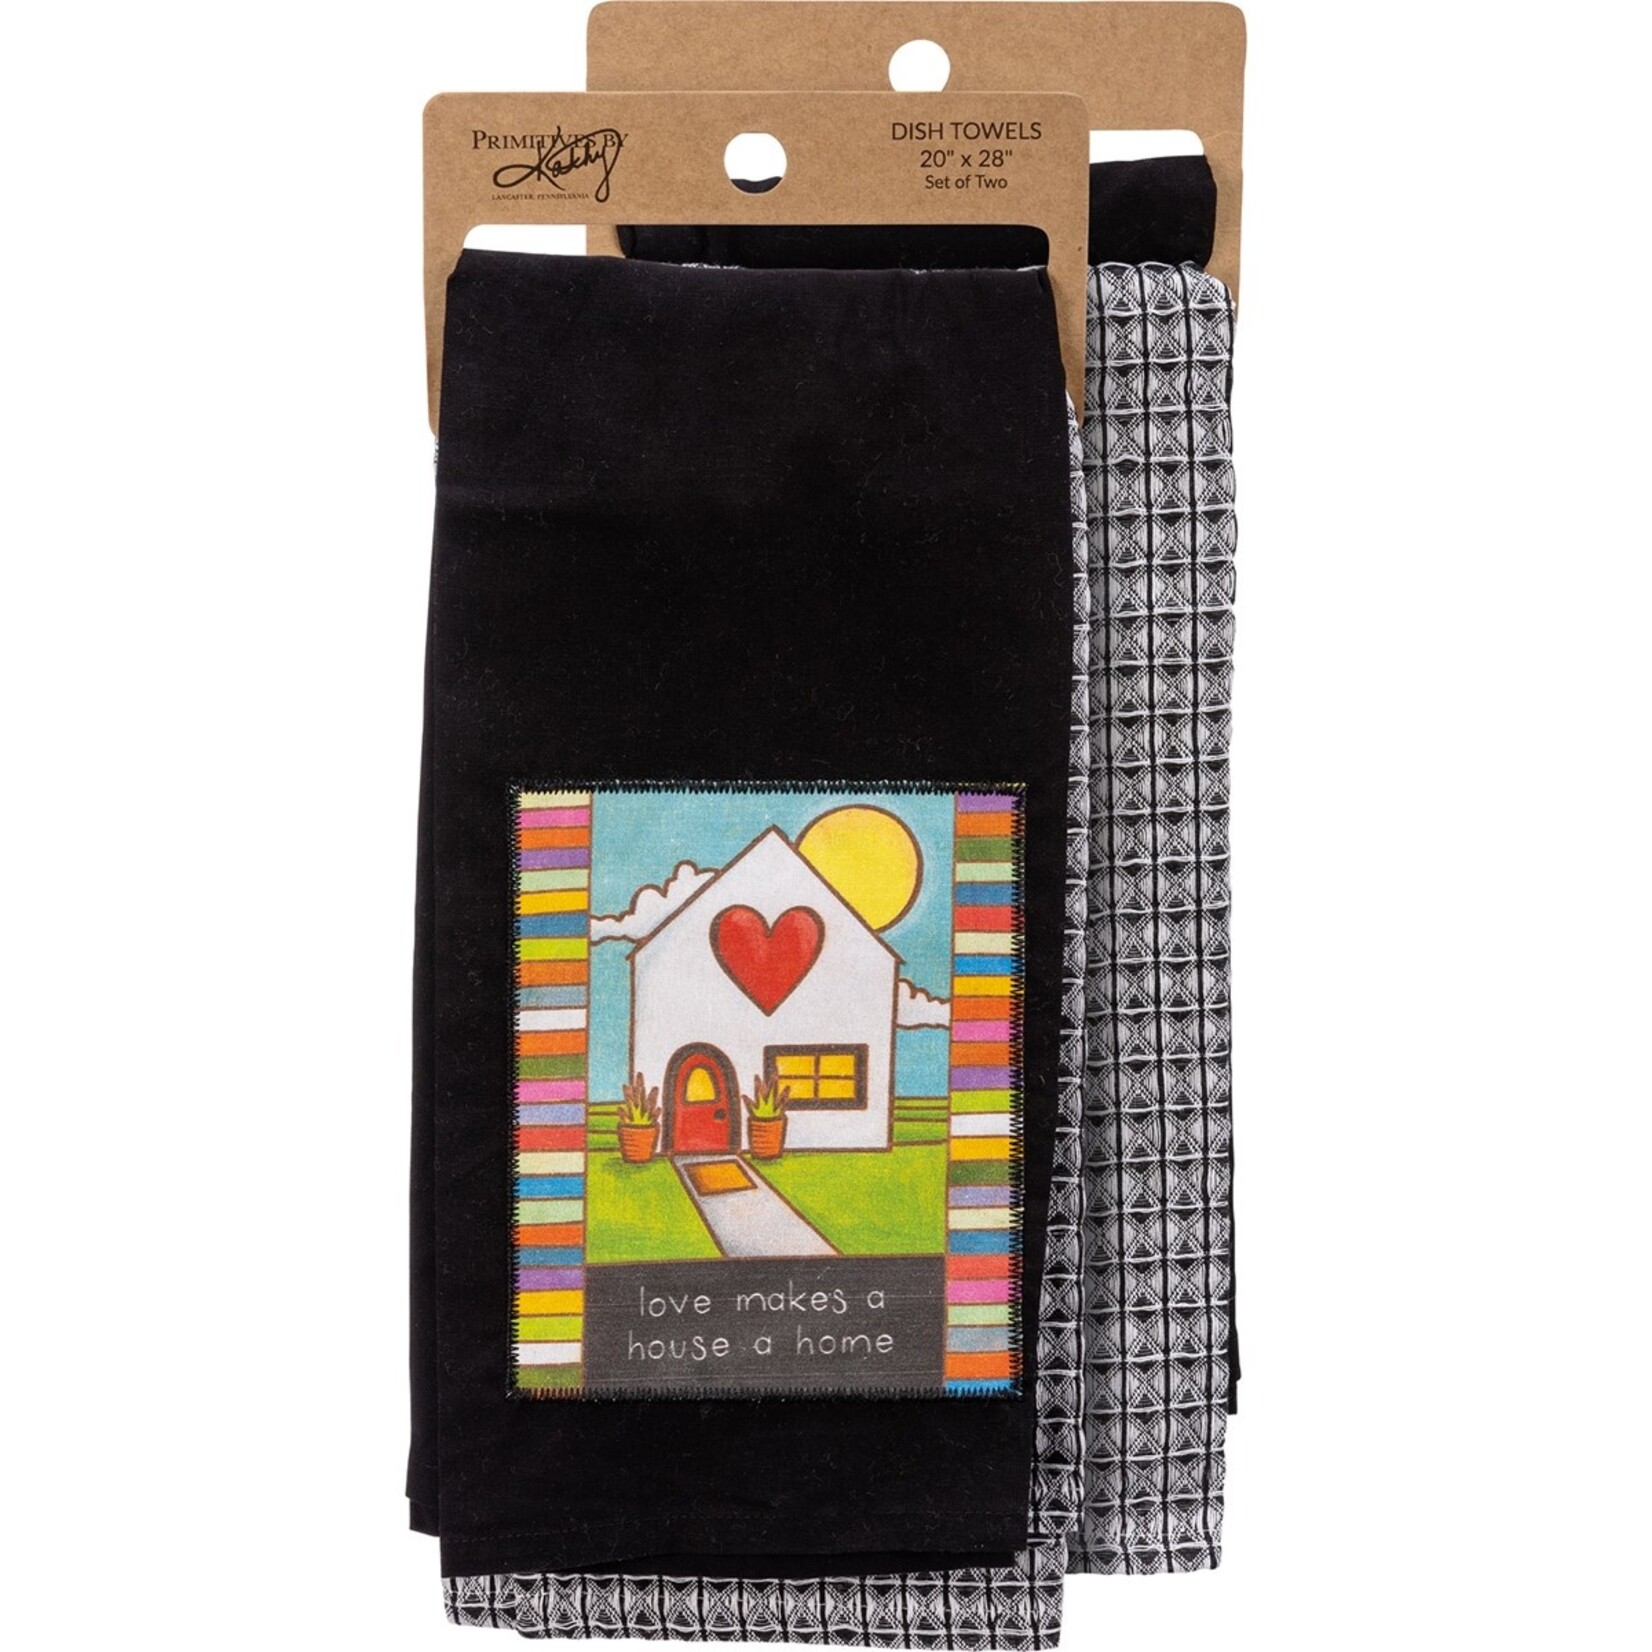 Primitives by Kathy Primitives by Kathy Love Makes A House A Home Towel Set